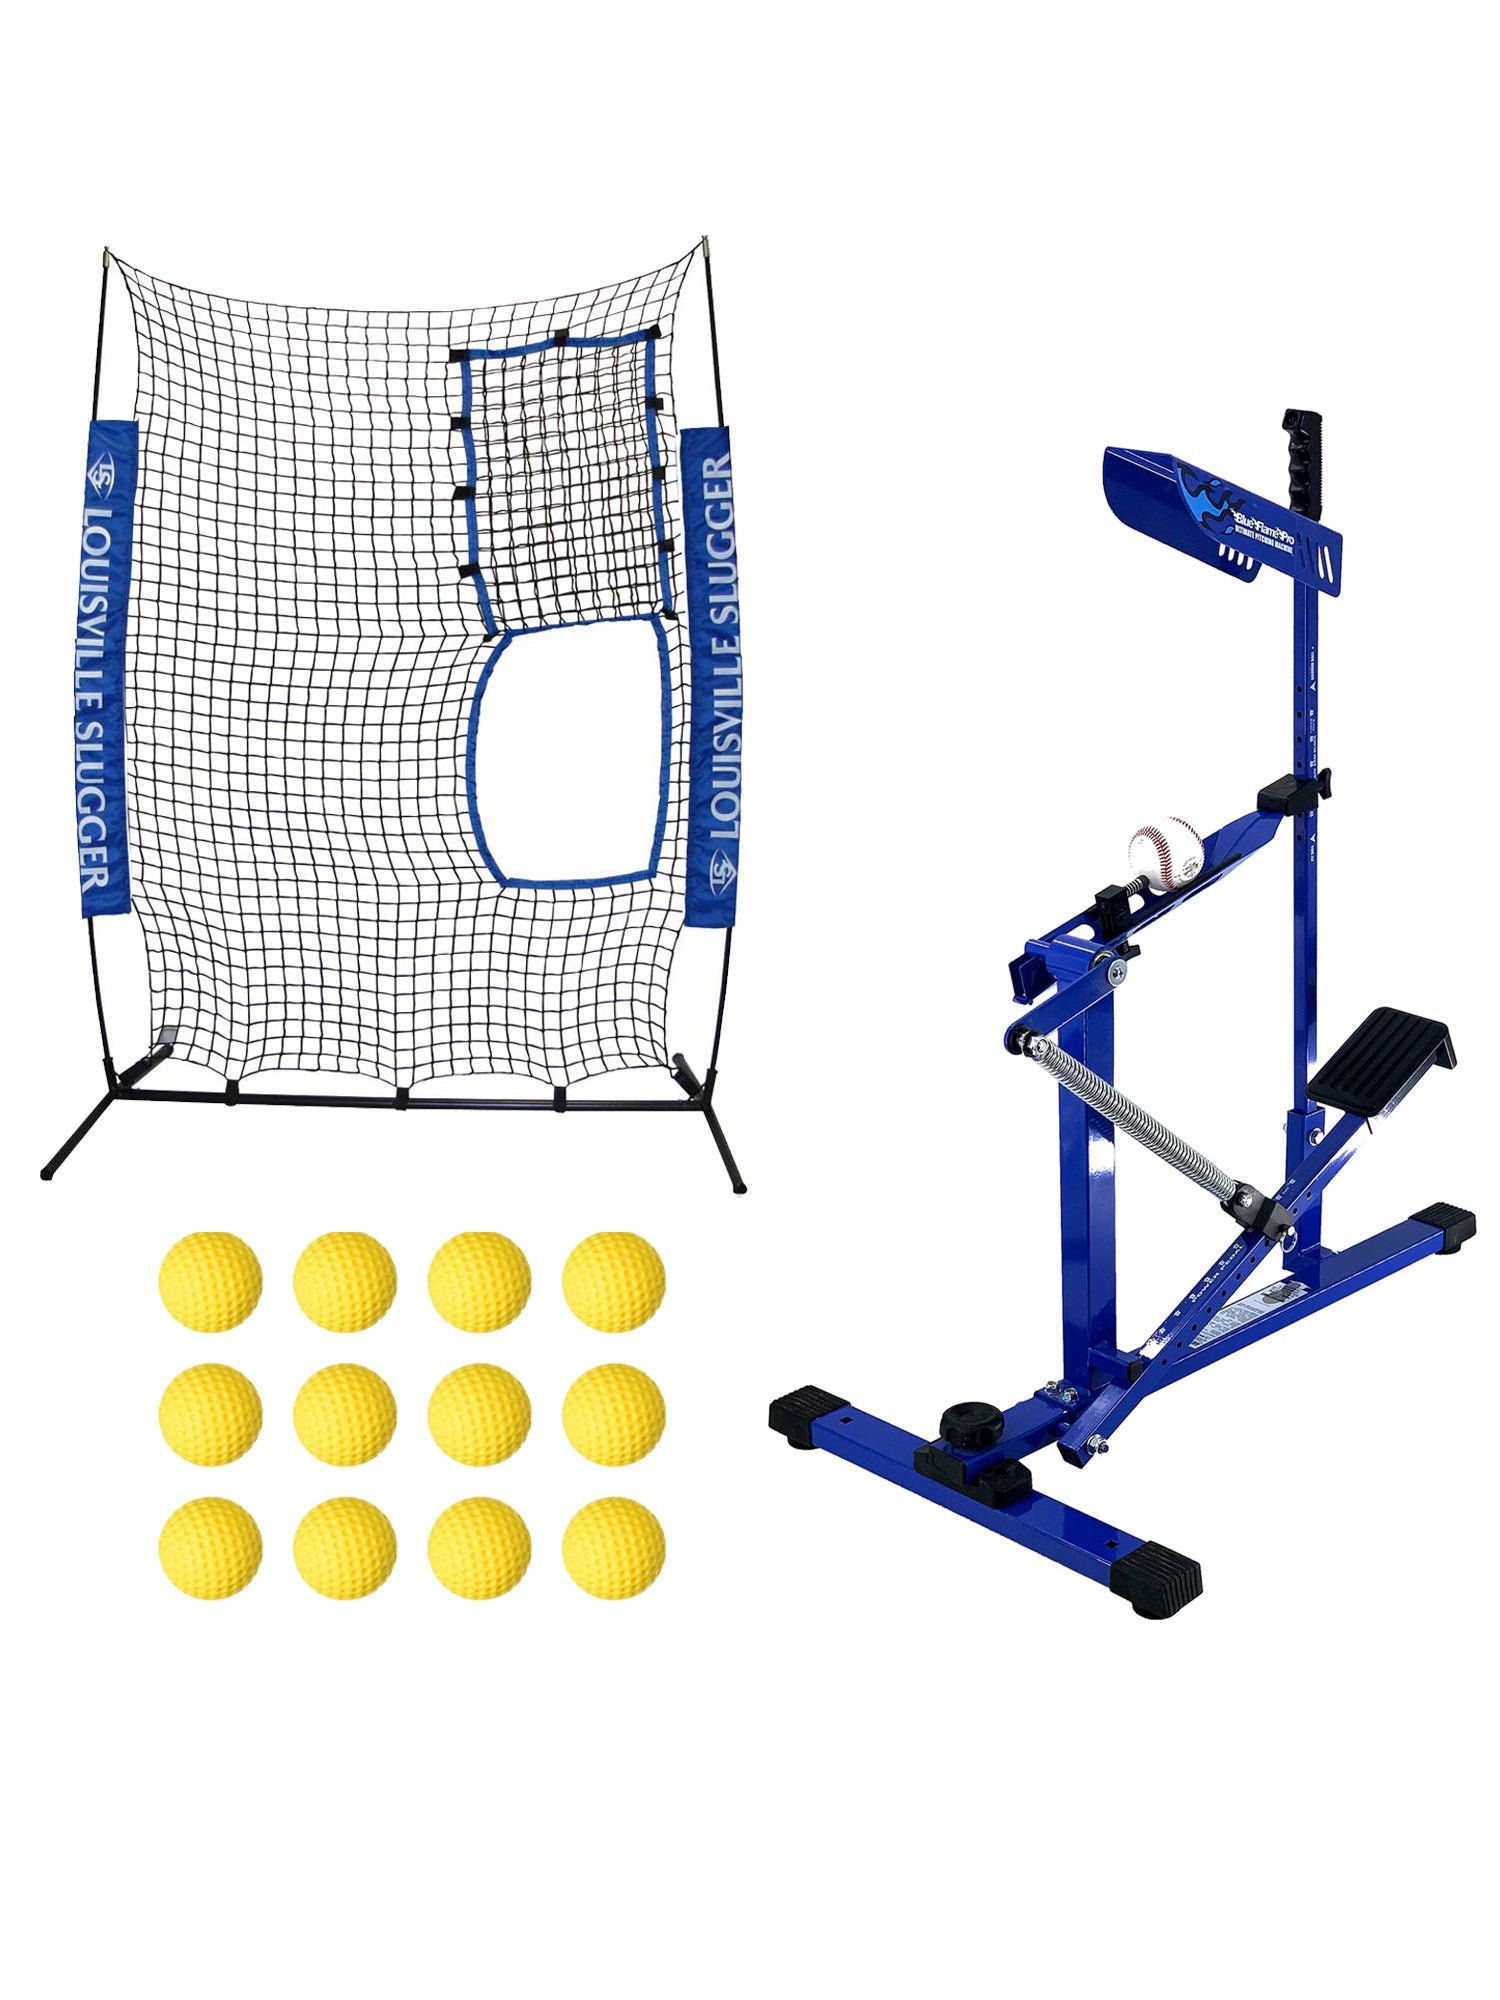 Louisville Slugger UPM 55 Blue Flame Pro Pitching Machine, Flex Protective Screen and Heater Sports 12-Pack Weighted Pitching Machine Baseballs Bundle - Pro-Distributing